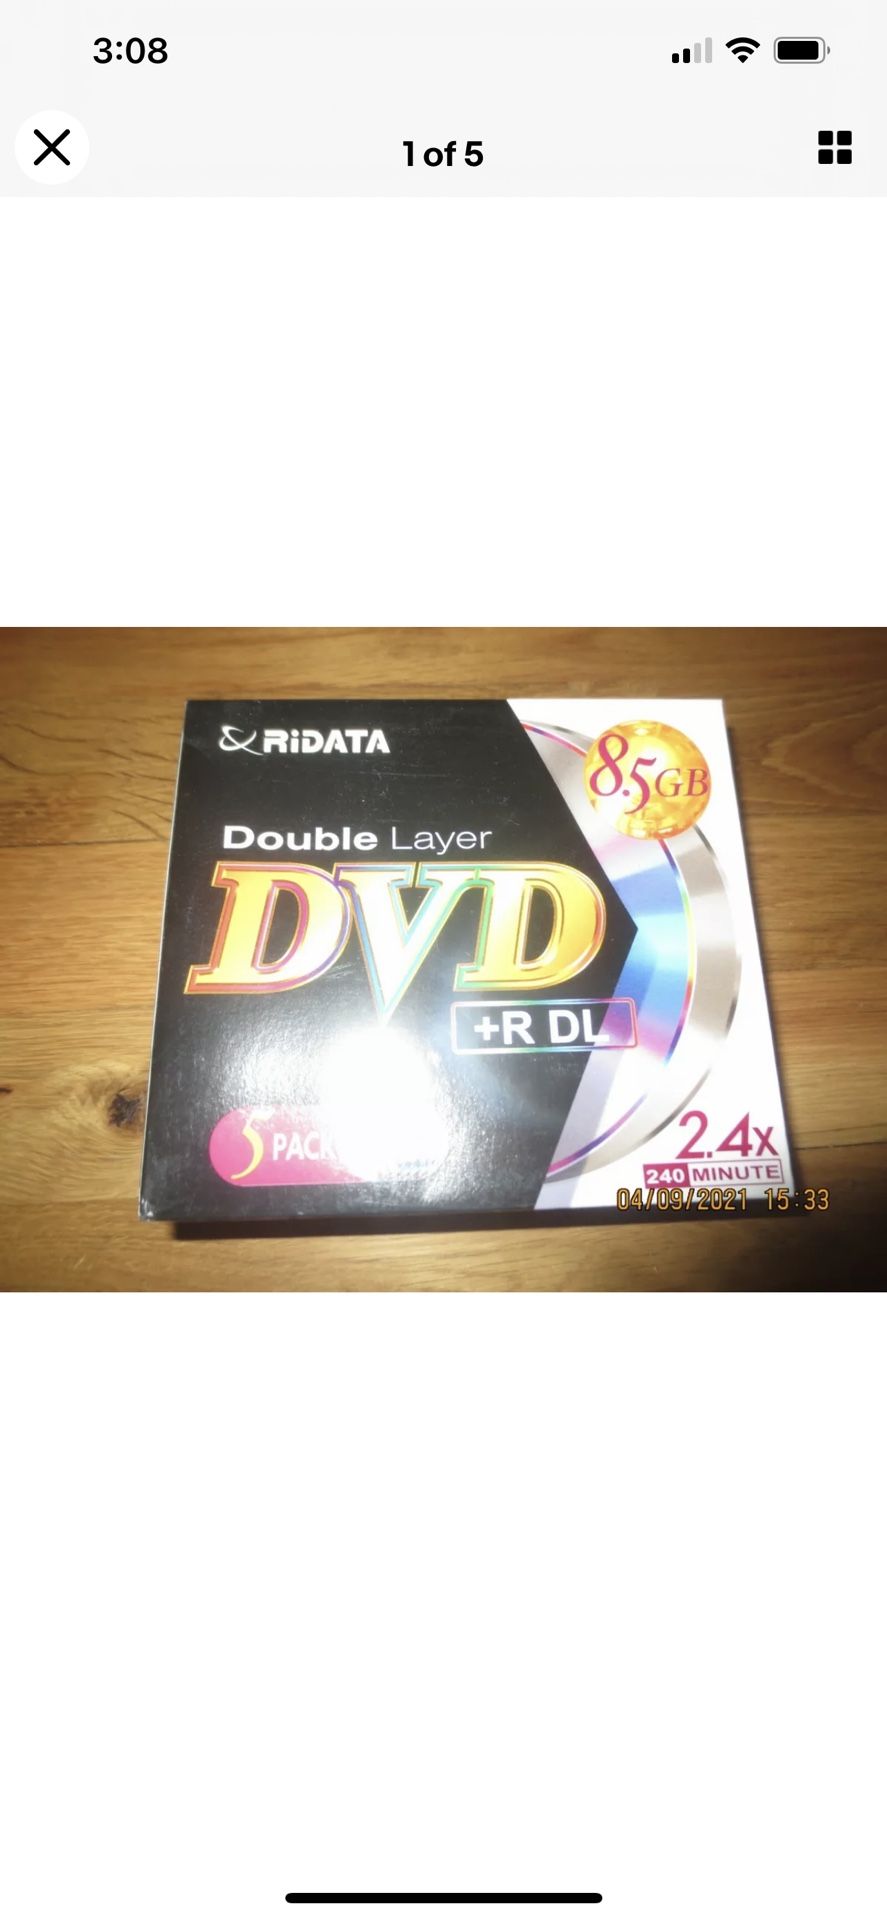 *NEW SEALED 5 PACK* Ridata Double Layer Dvd + R DL 5 Pack 2.4x 240 Minute 8.5 Gb